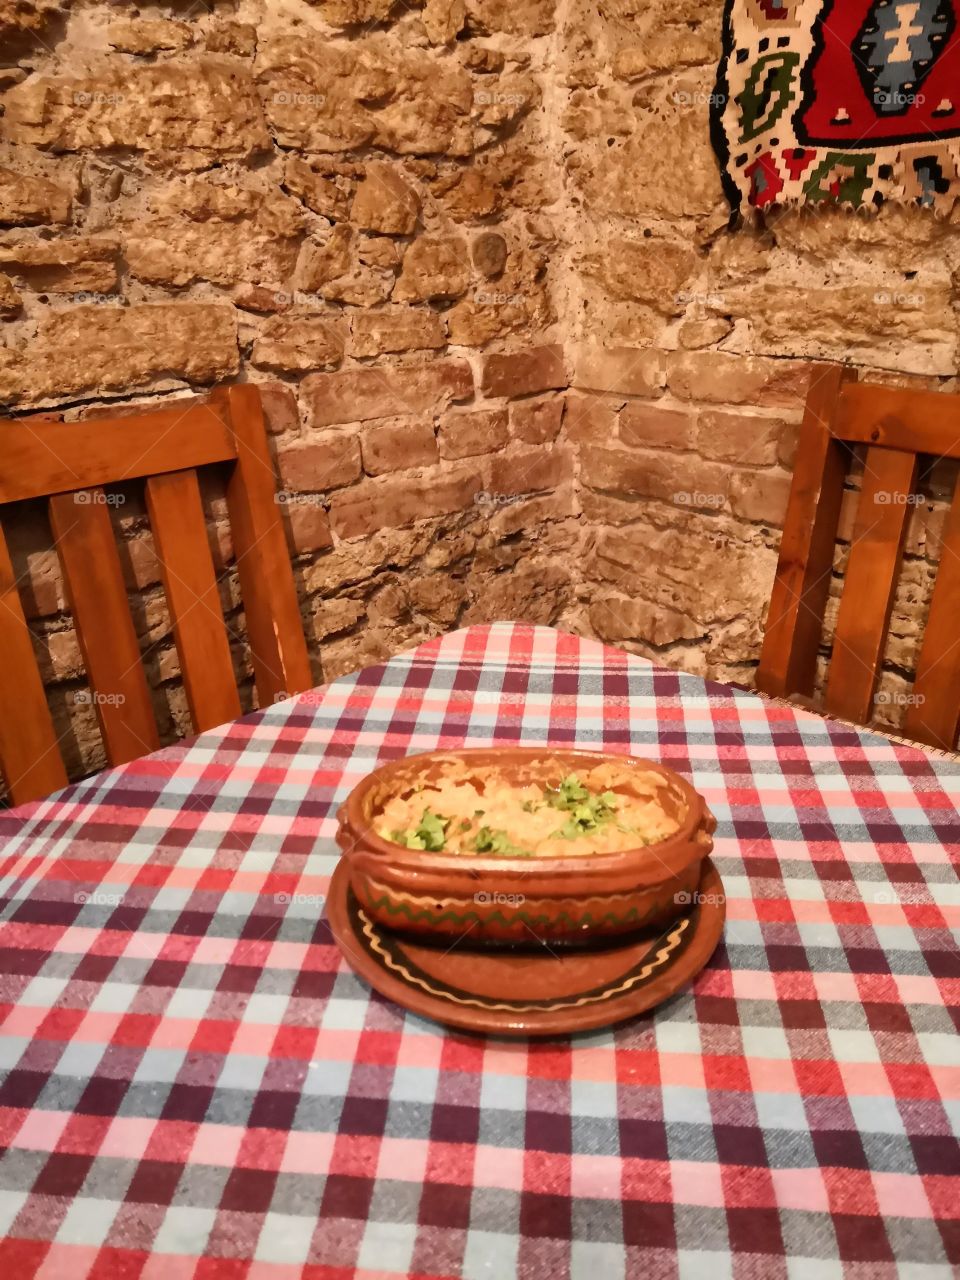 Traditional Macedonian food in a traditional interior. The name of the food: Tavche Gravche.